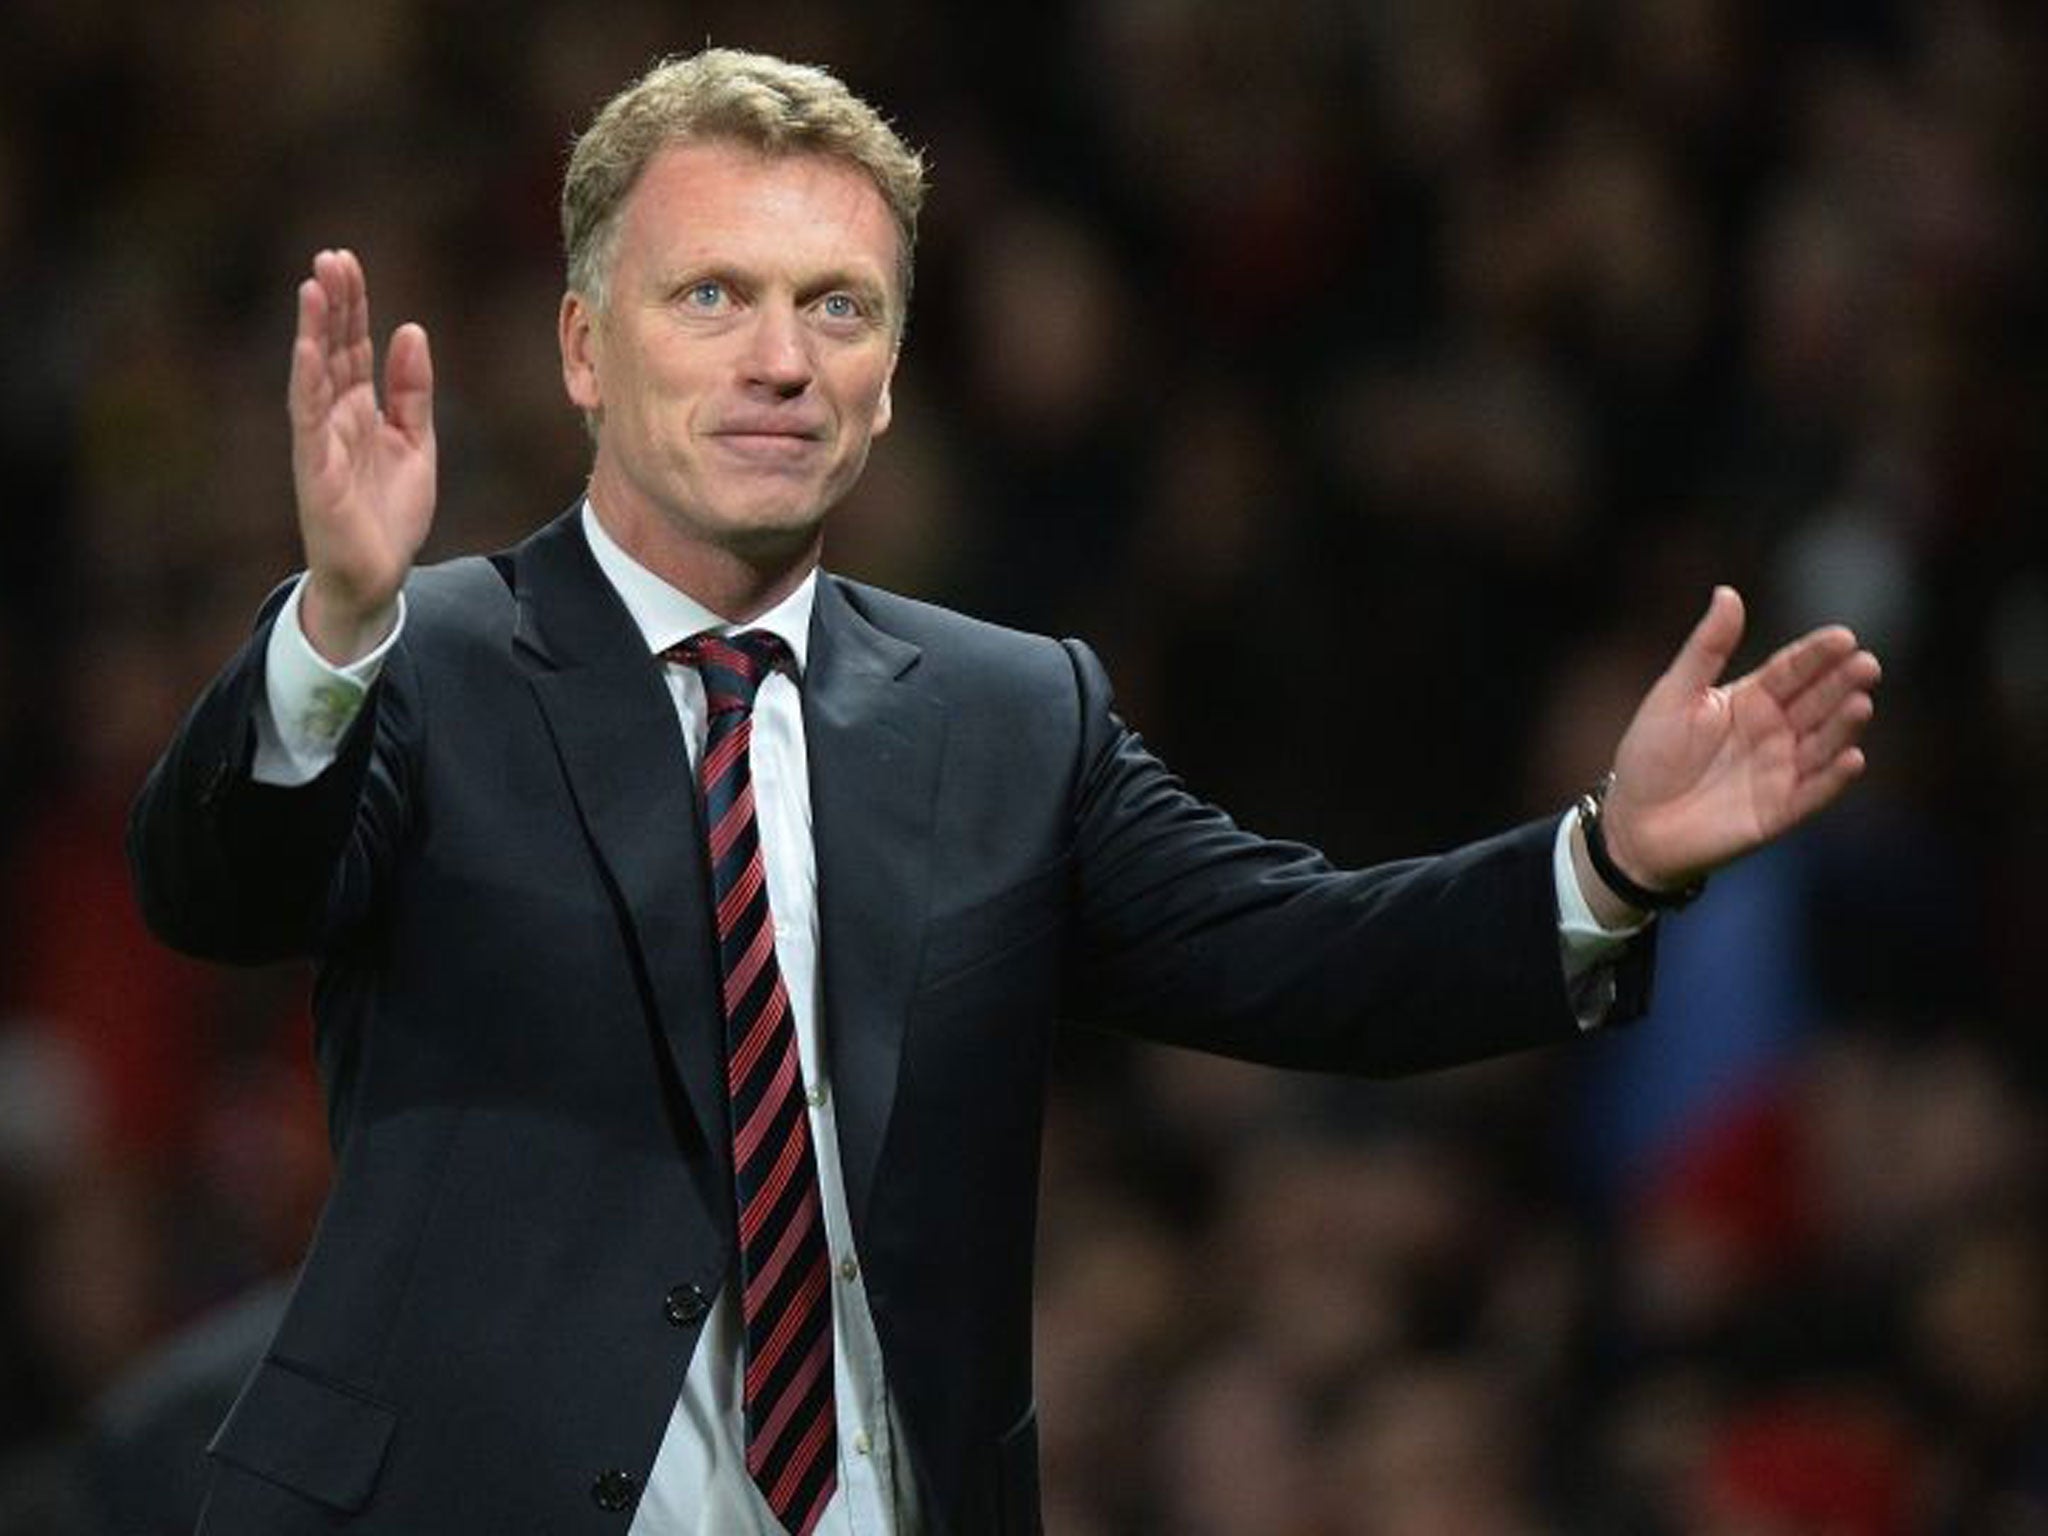 David Moyes celebrates Manchester United's 3-0 victory after the UEFA Champions League round of 16 second leg soccer match between Manchester United and Olympiacos FC at Old Trafford in Manchester